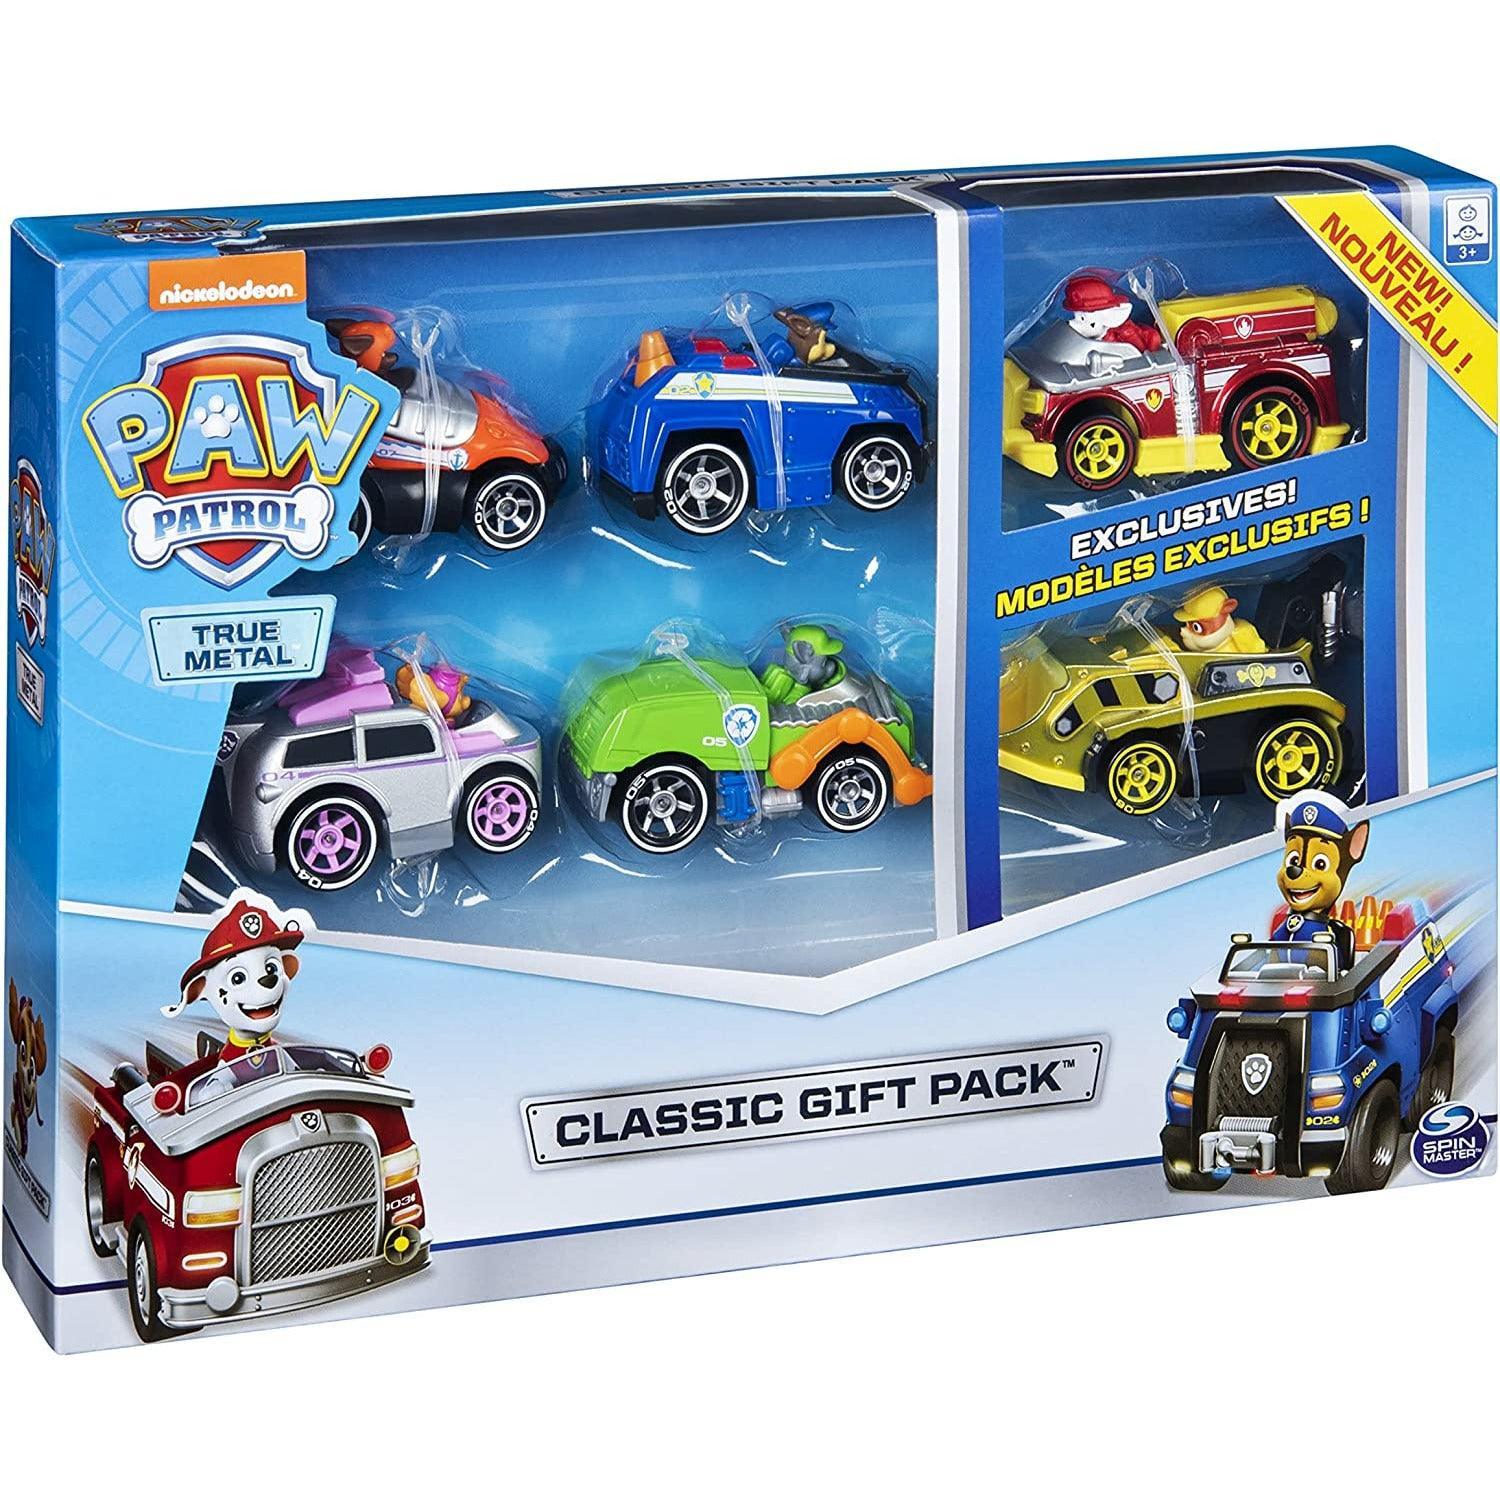 Paw Patrol True Metal Collectible Die-Cast Vehicles, 1:55 Scale Classic Gift Pack of 6 - BumbleToys - 2-4 Years, 5-7 Years, Action Battling, Boys, OXE, Paw Patrol